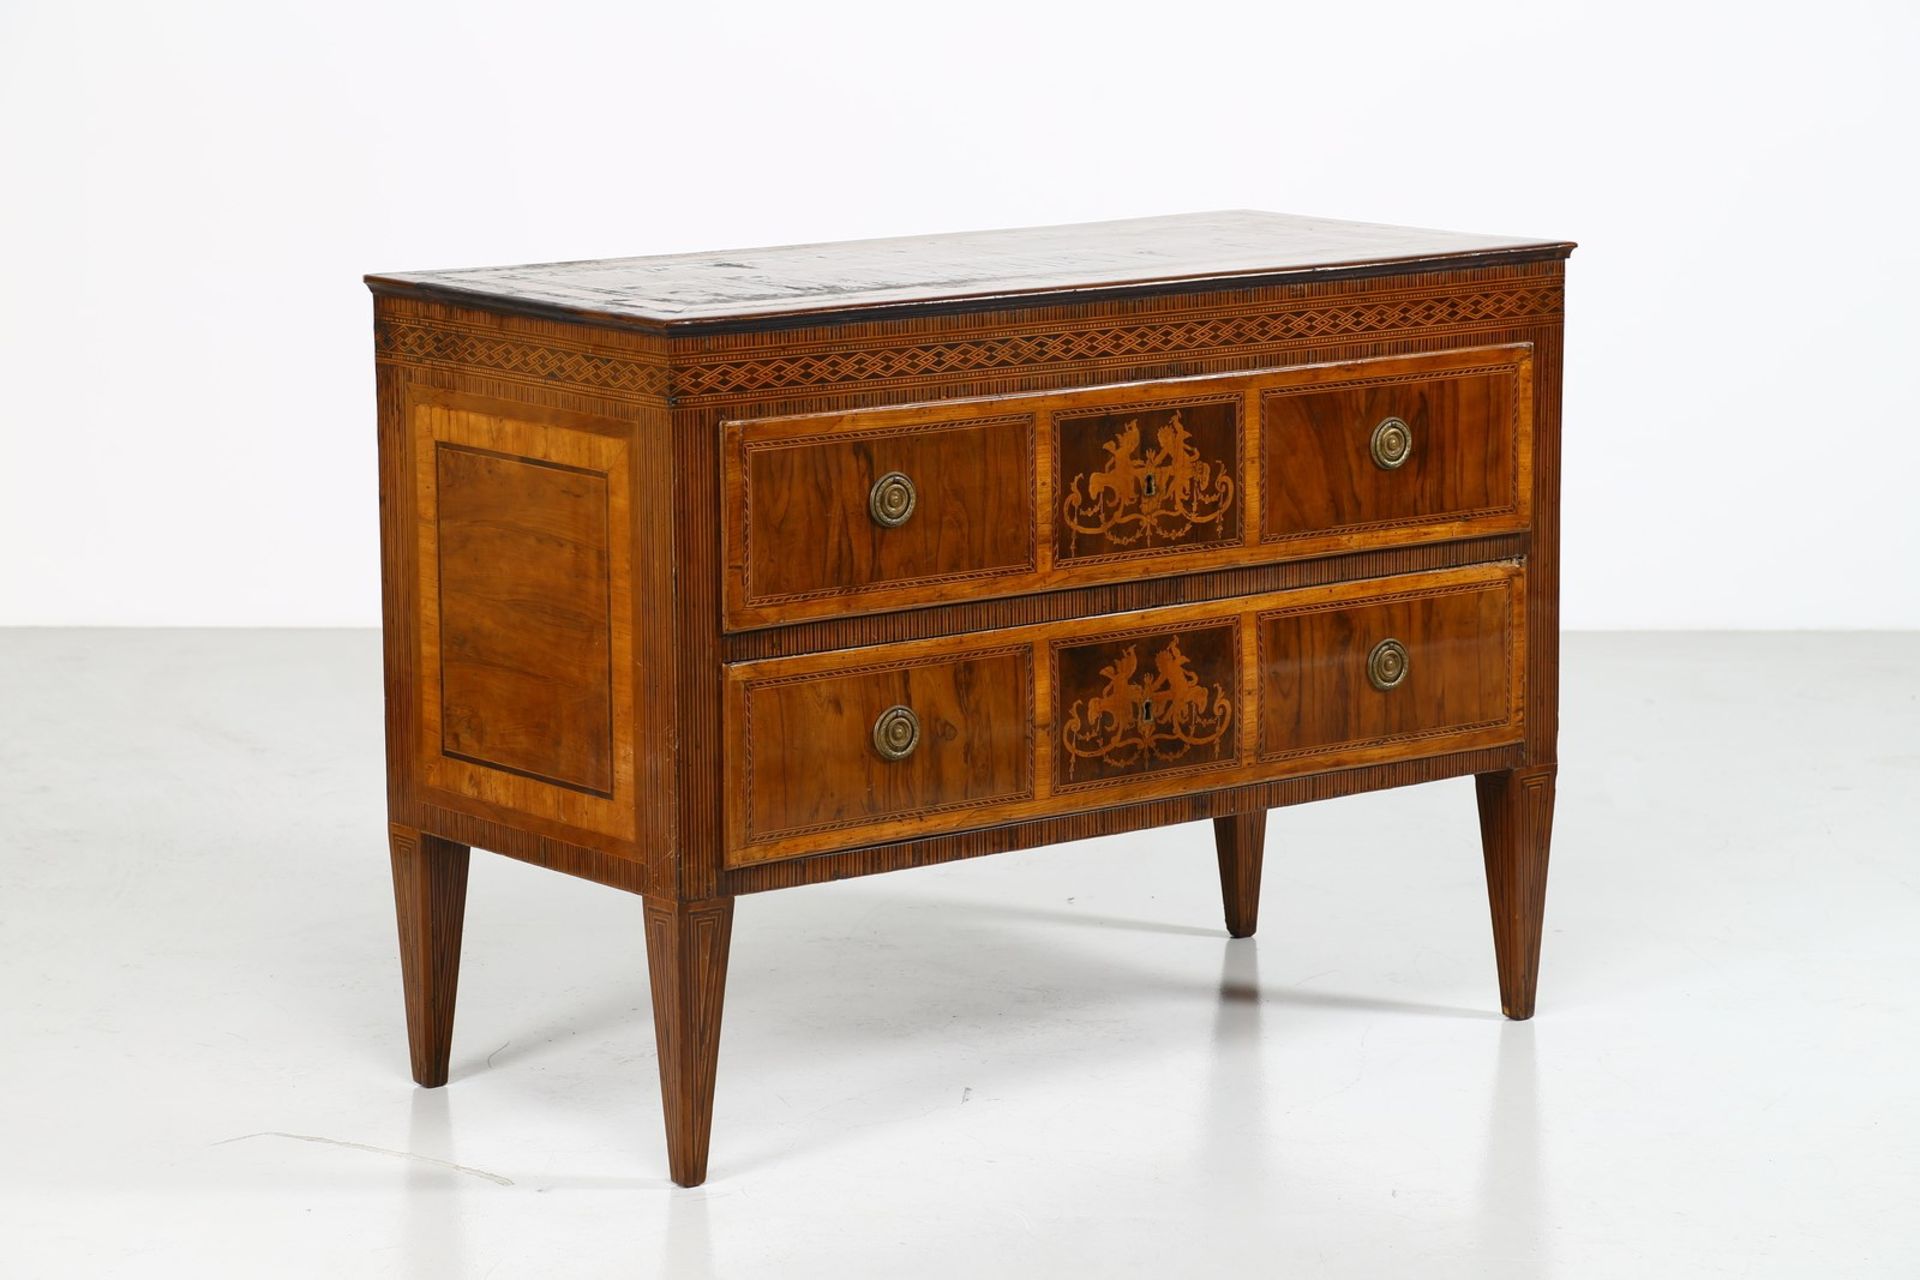 MANIFATTURA ITALIANA DEL XVIII SECOLO Dresser inlaid in exotic woods with two drawers.